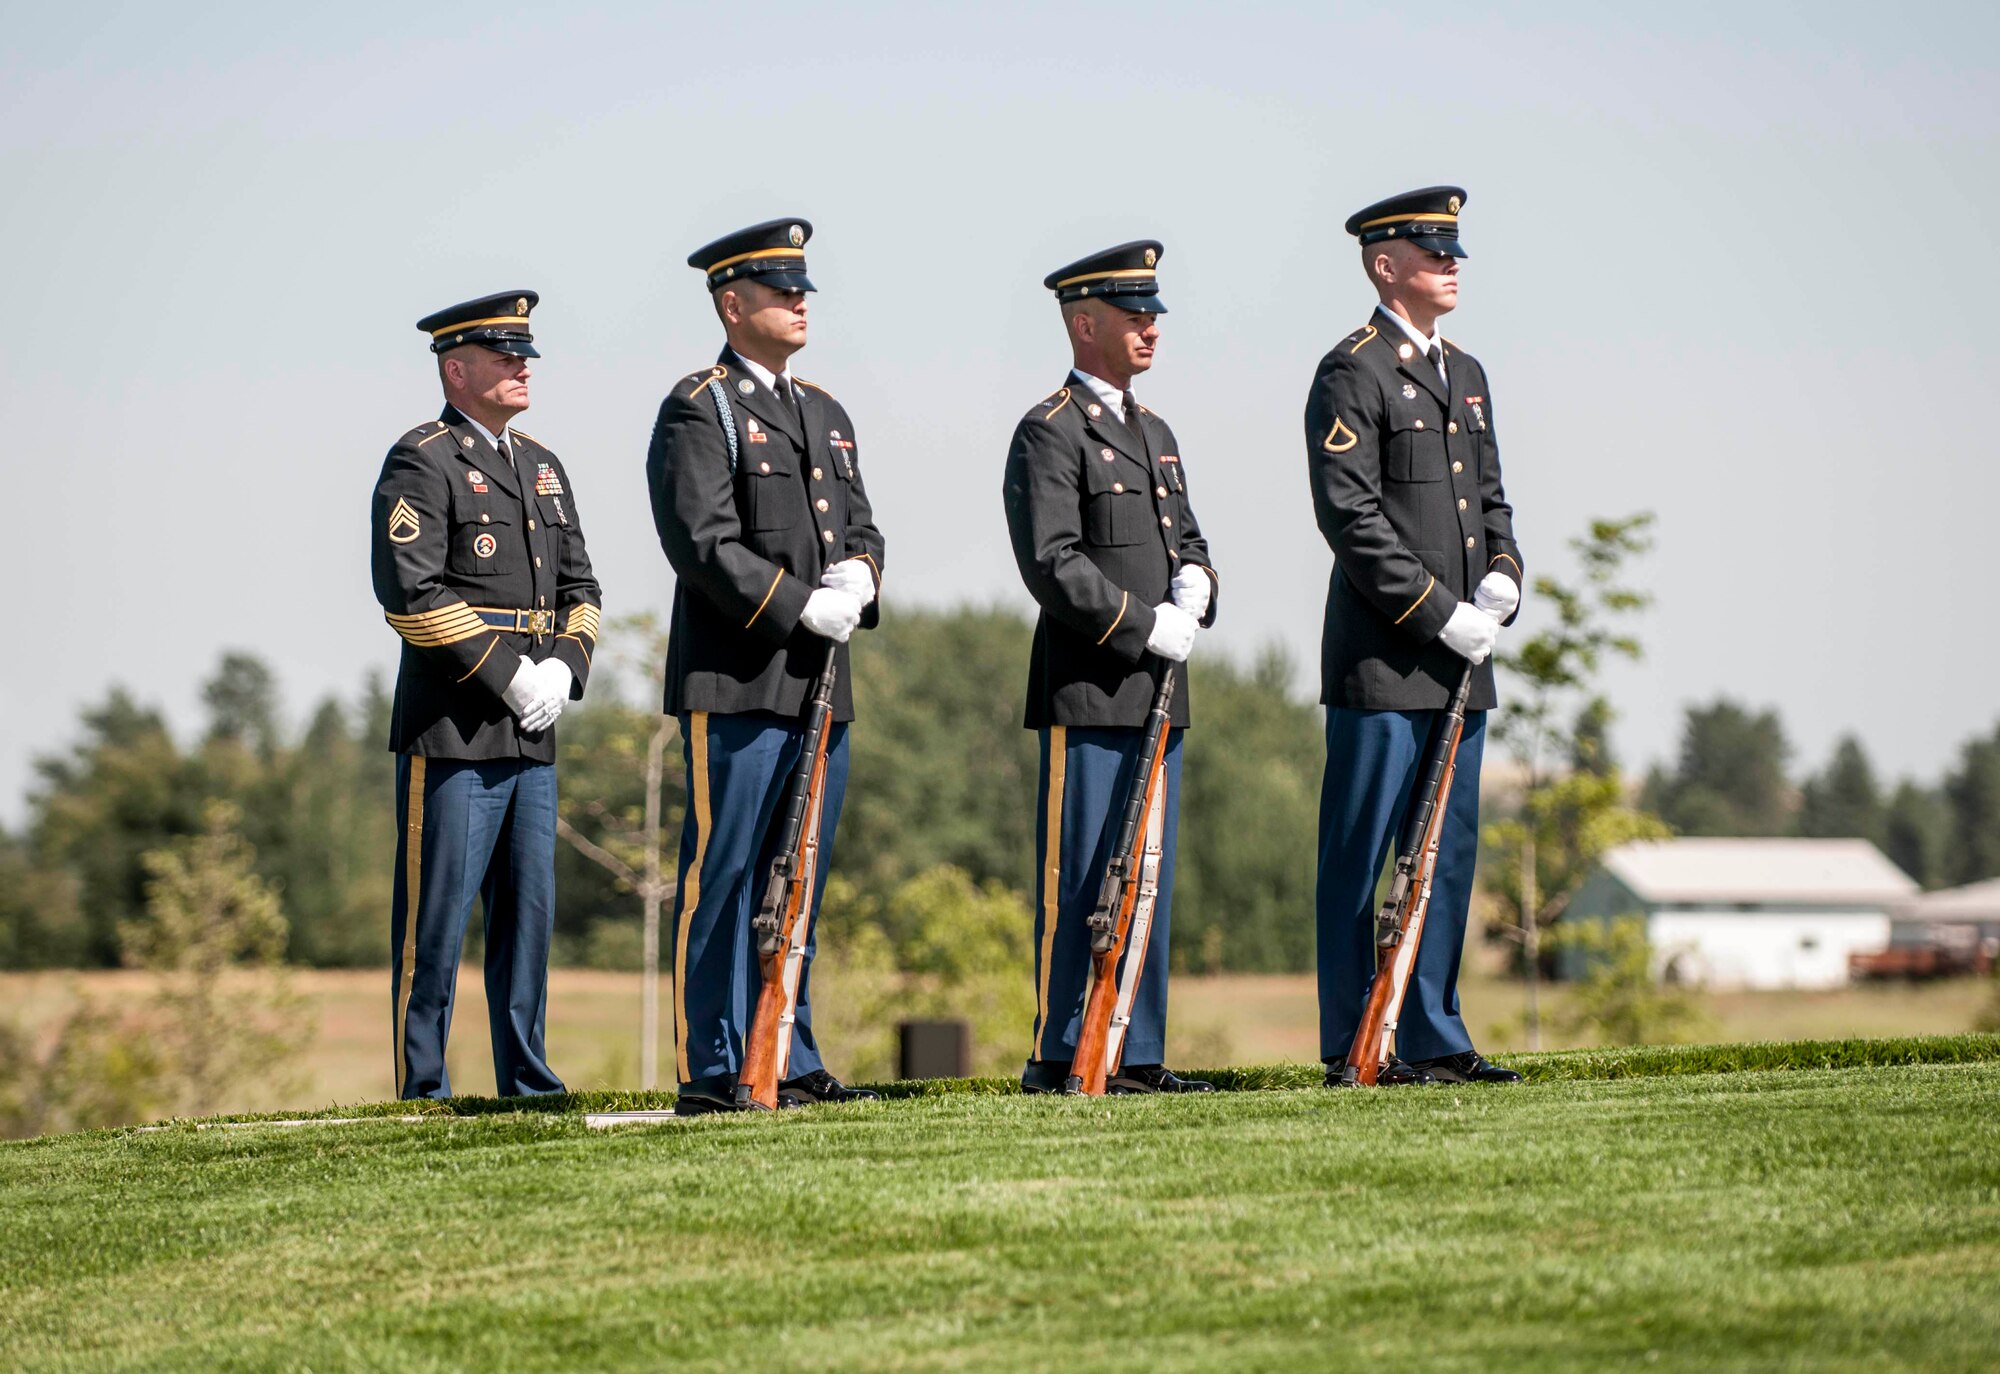 Soldiers from the Washington Army National Guard position themselves for the start of the military honors ceremony held for a fallen Airman at the Washington State Veterans Cemetary in Medical Lake July 30, 2012. (U.S. Air Force photo by Master Sgt. Michael Stewart/Released)